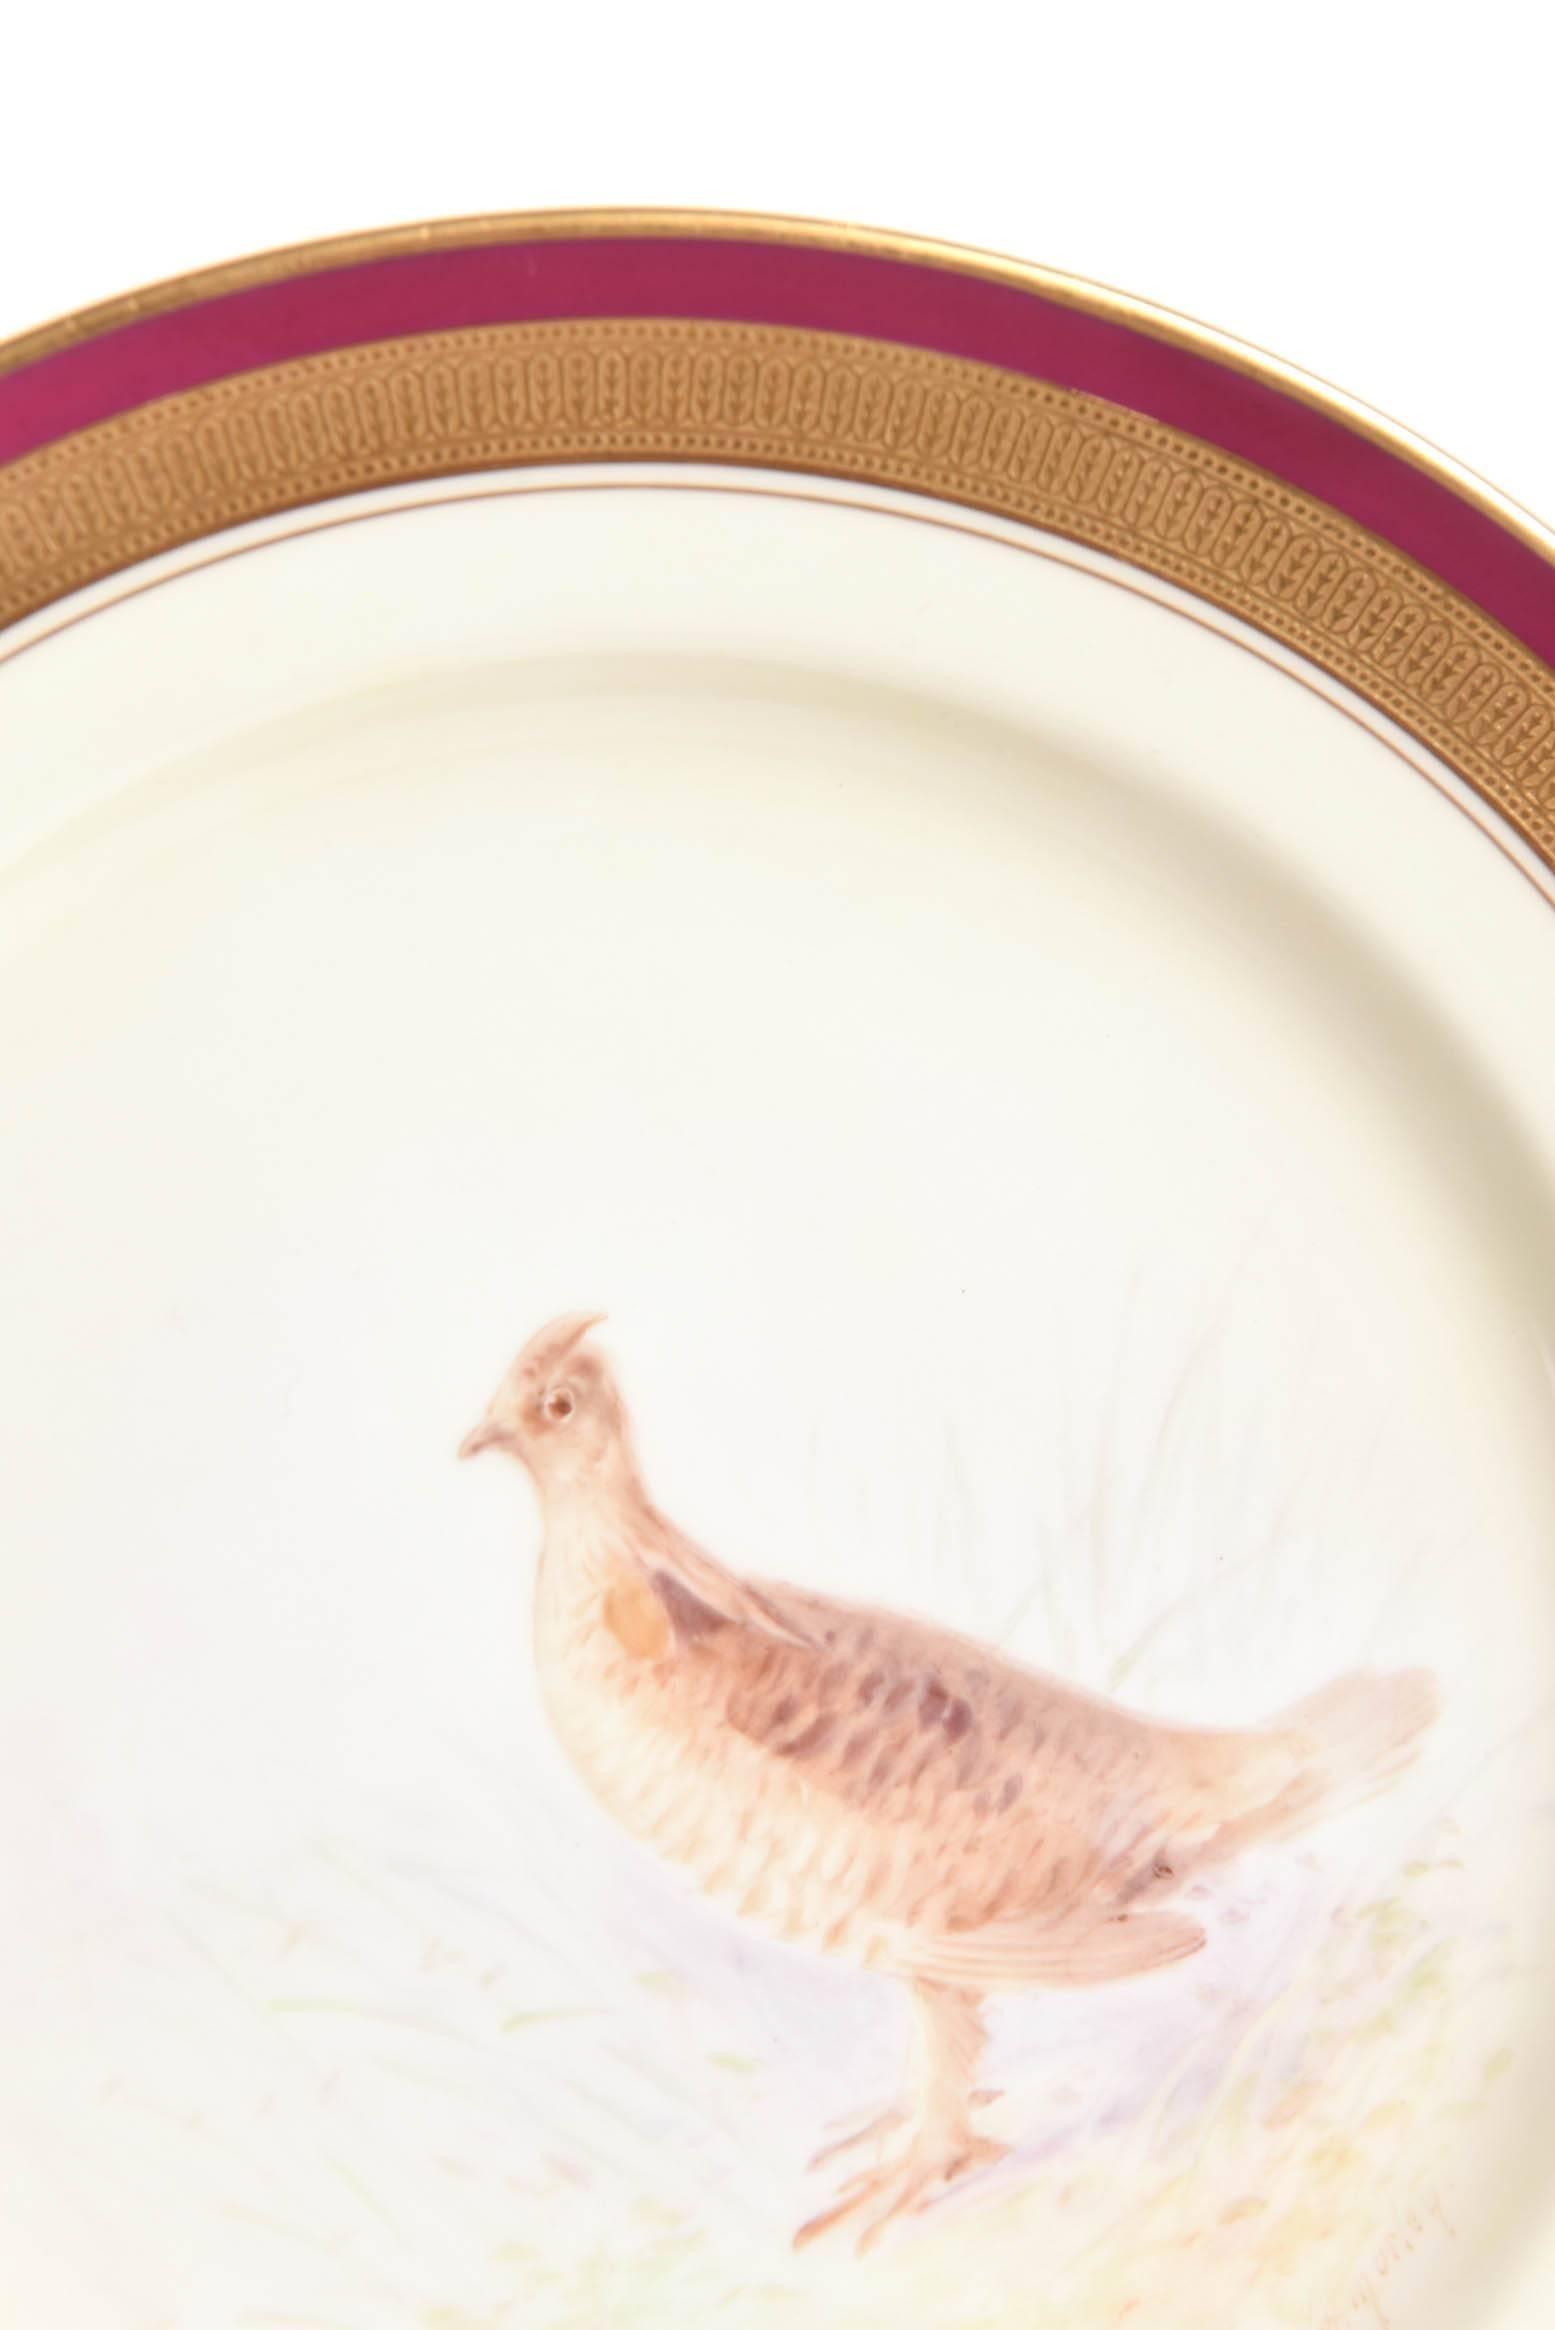 A lovely set of antique and detailed game bird plates by Lenox and circa 1920. Custom ordered through the fine Philadelphia Gilded Age Retailer of Bailey, Banks, & Biddle. Each plate meticulously painted and signed on the back. All-over full flora